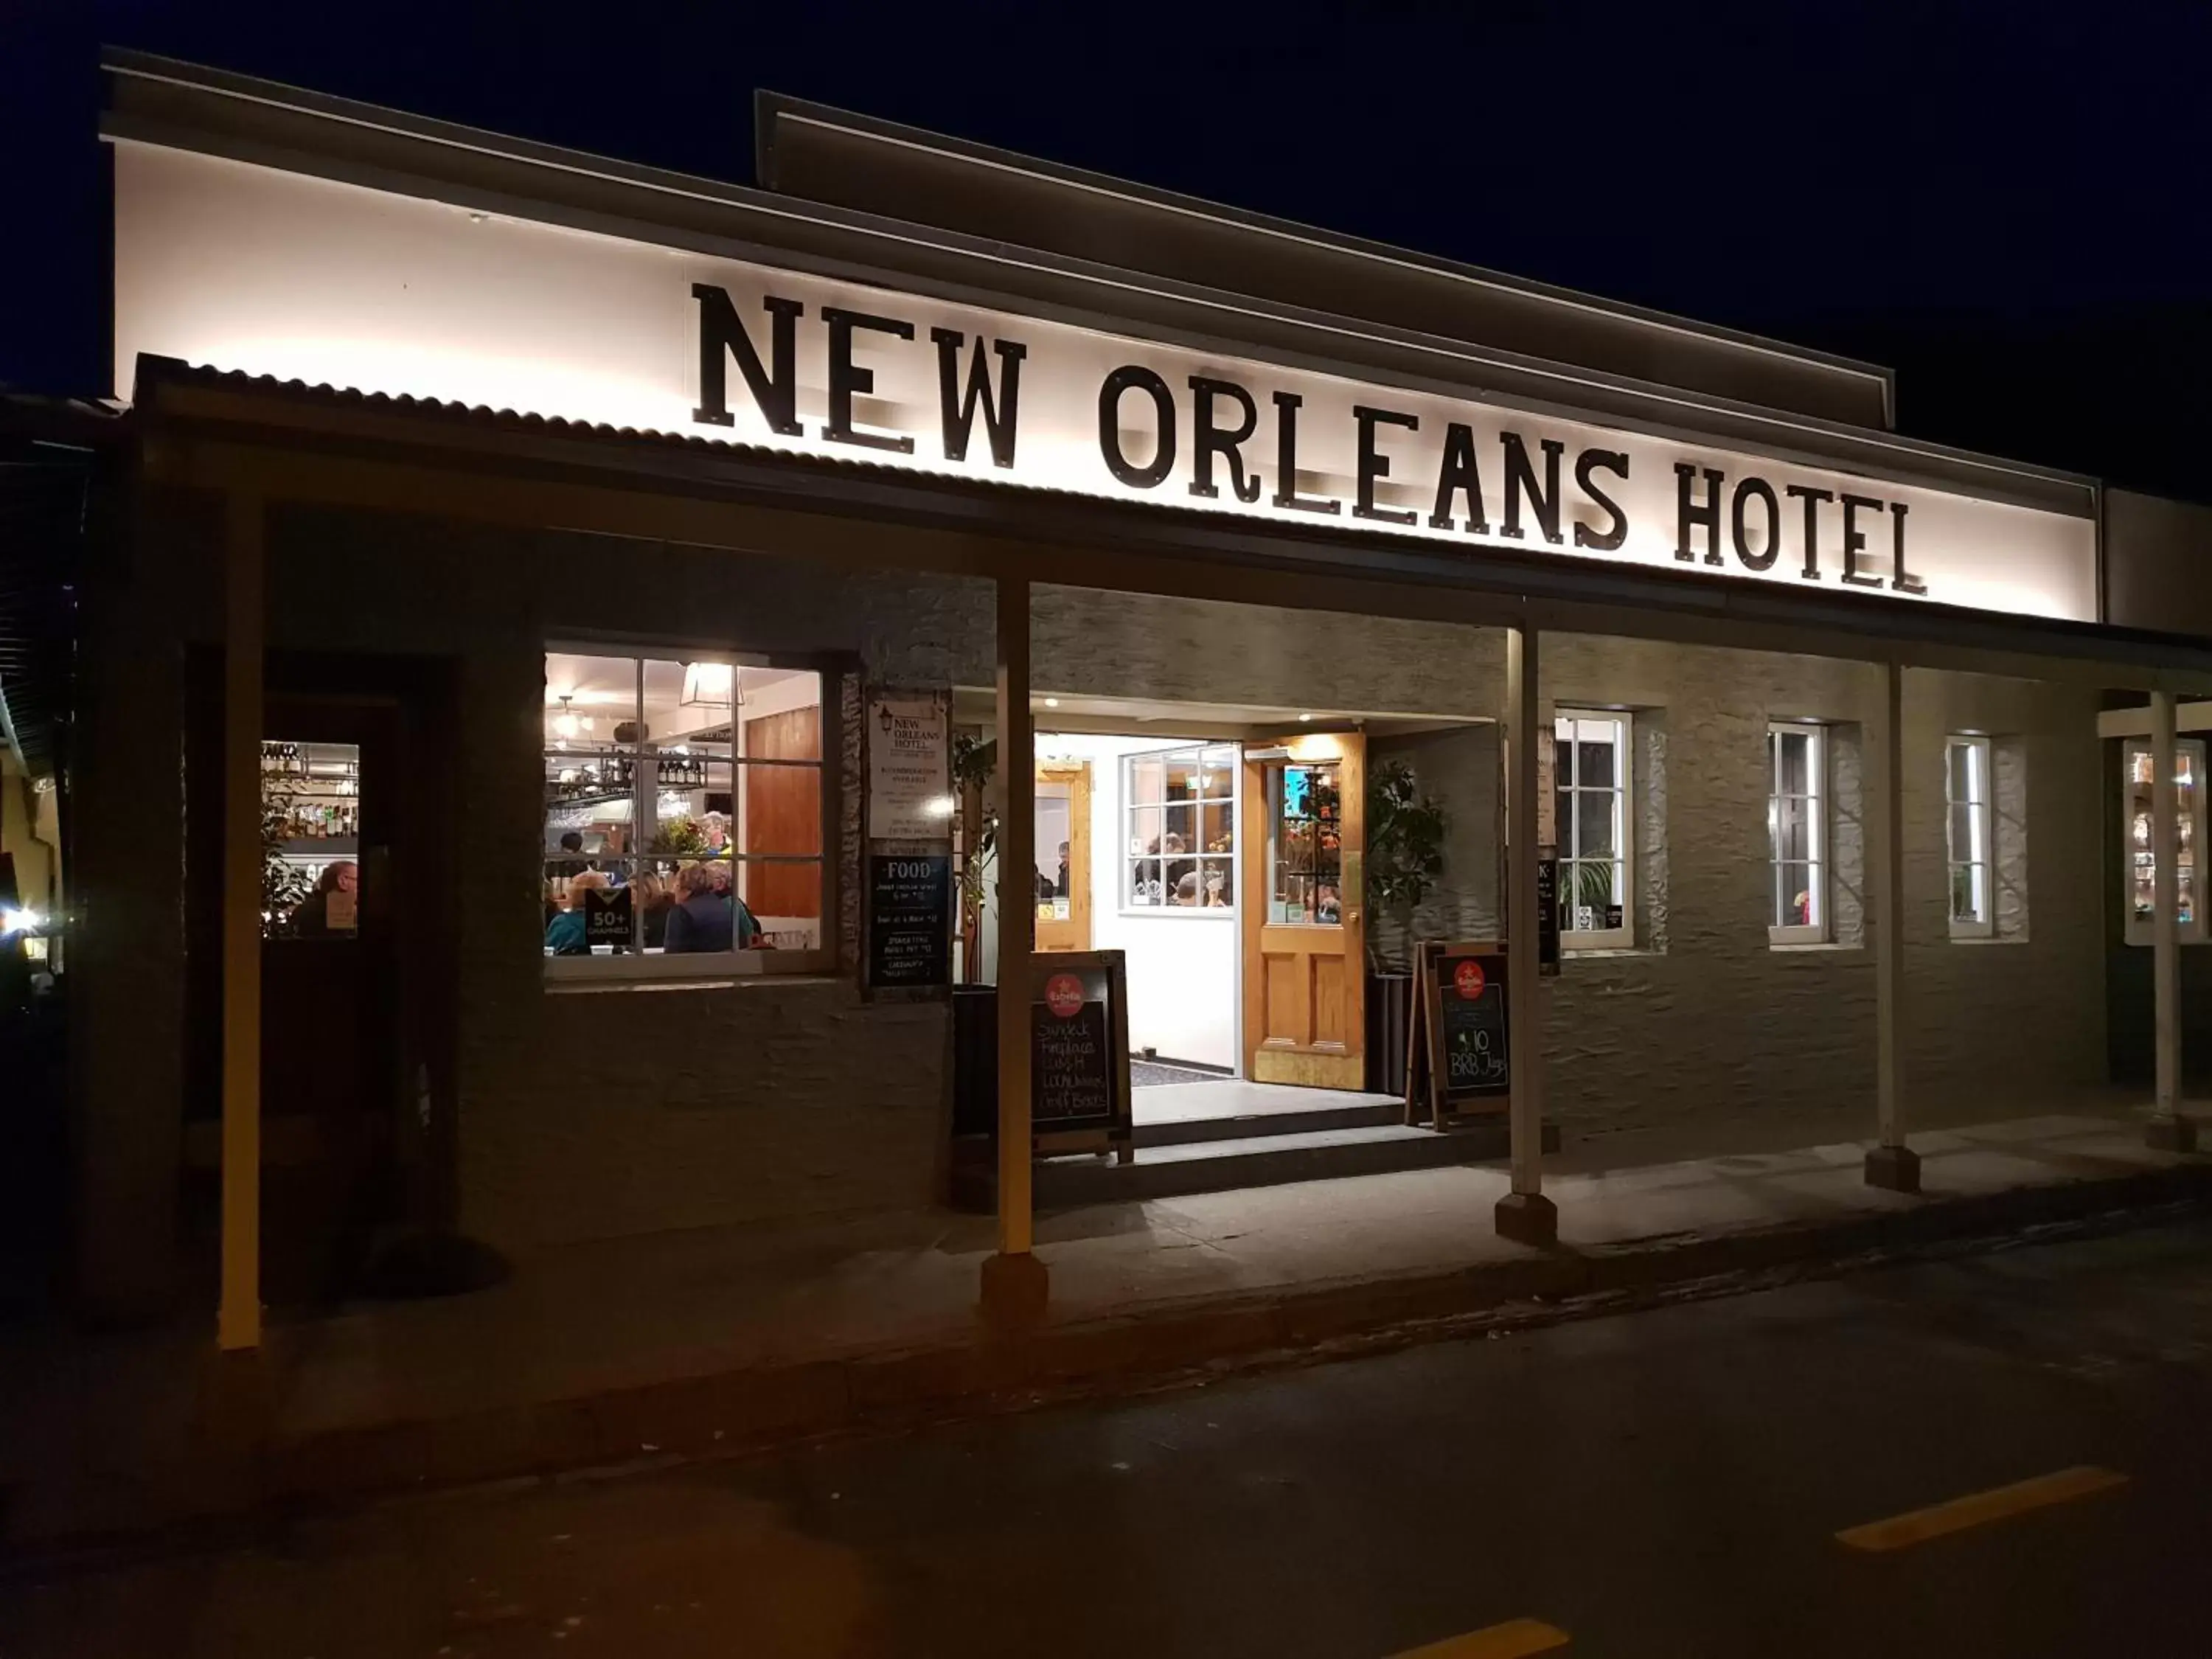 Night in New Orleans Hotel